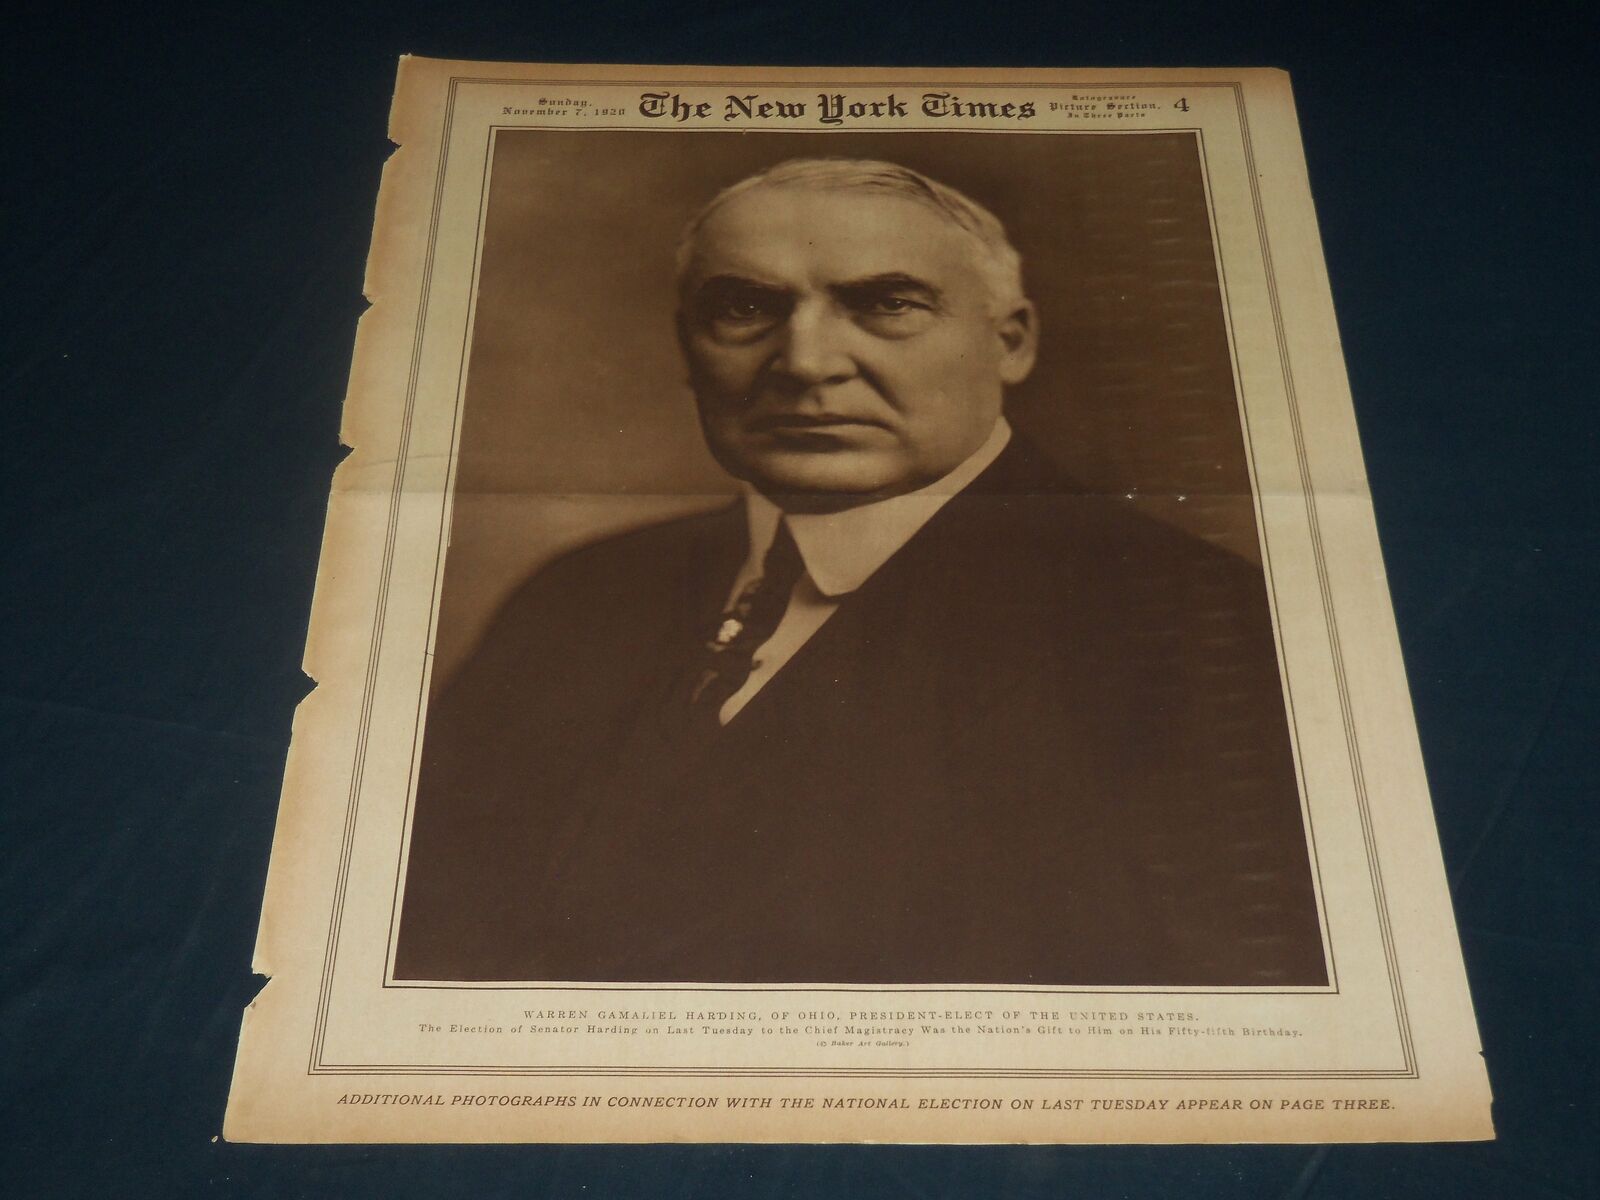 1920 NOV 7 NEW YORK TIMES PICTURE SECTION NO. 4 - PRESIDENT HARDING - NT 8780